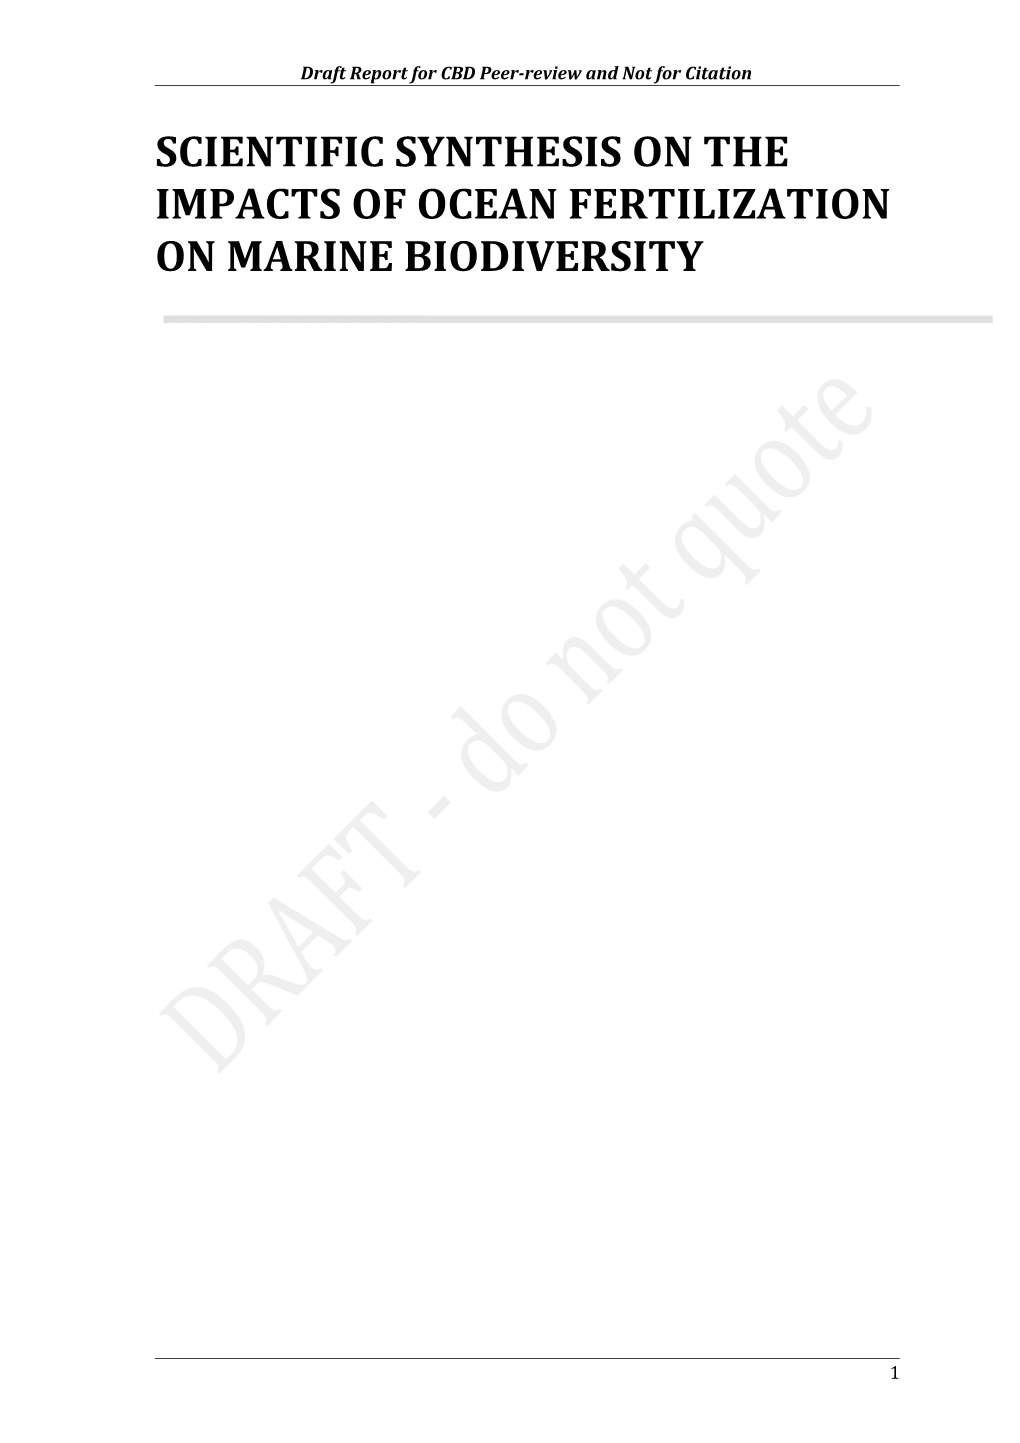 Scientific Synthesis on the Impacts of Ocean Fertilization on Marine Biodiversity